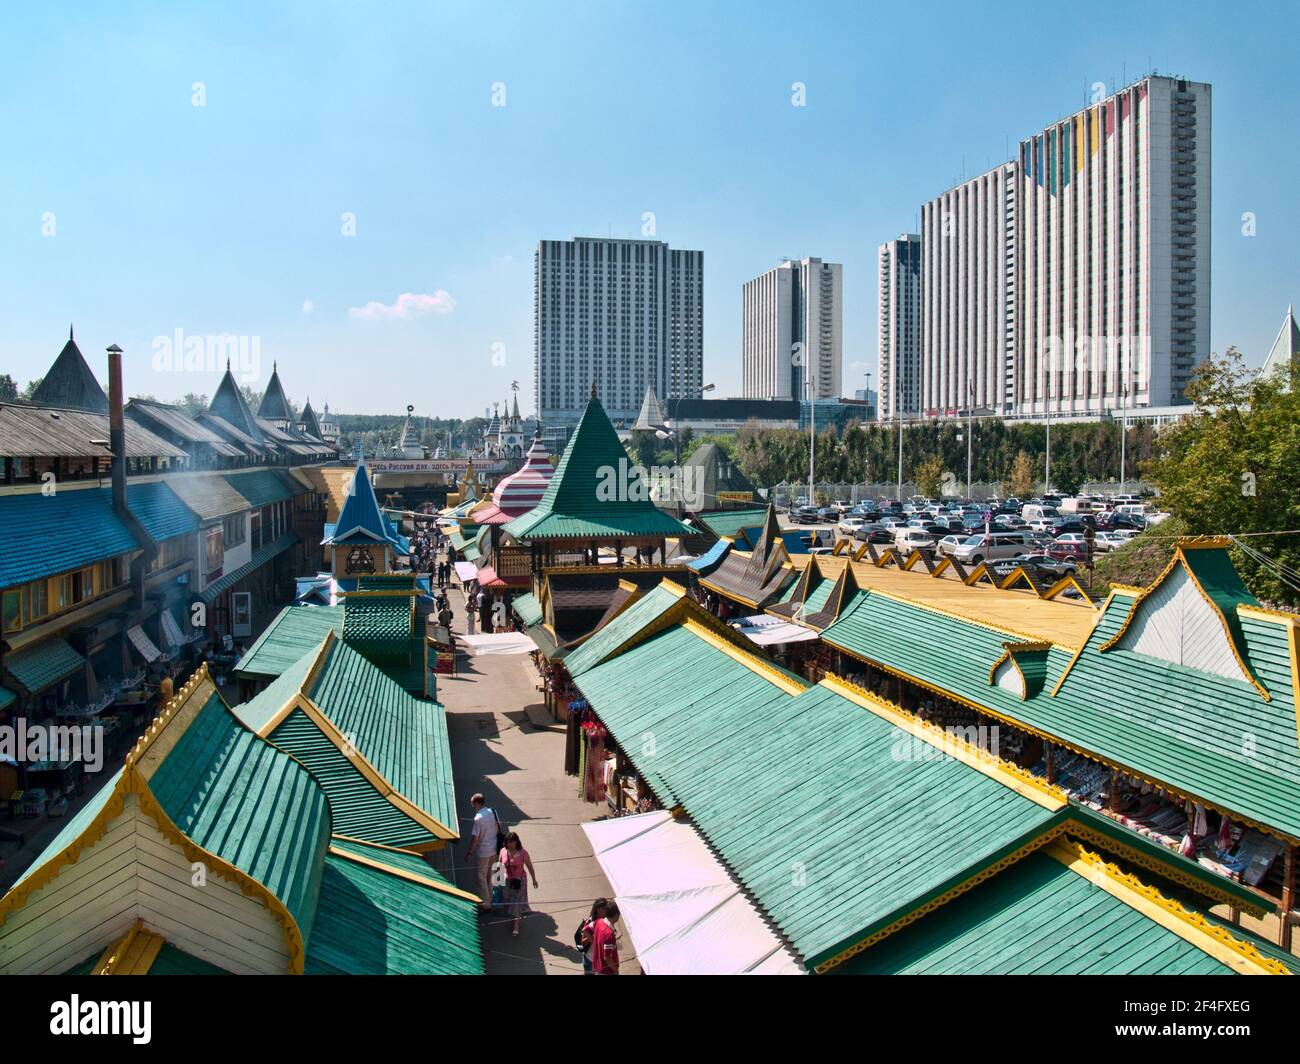 = Vernisazh Trade Rows =  View on trade rows of Vernisazh crafts market from pedestrian bridge connecting the trade area with wooden fortress, the Izm Stock Photo